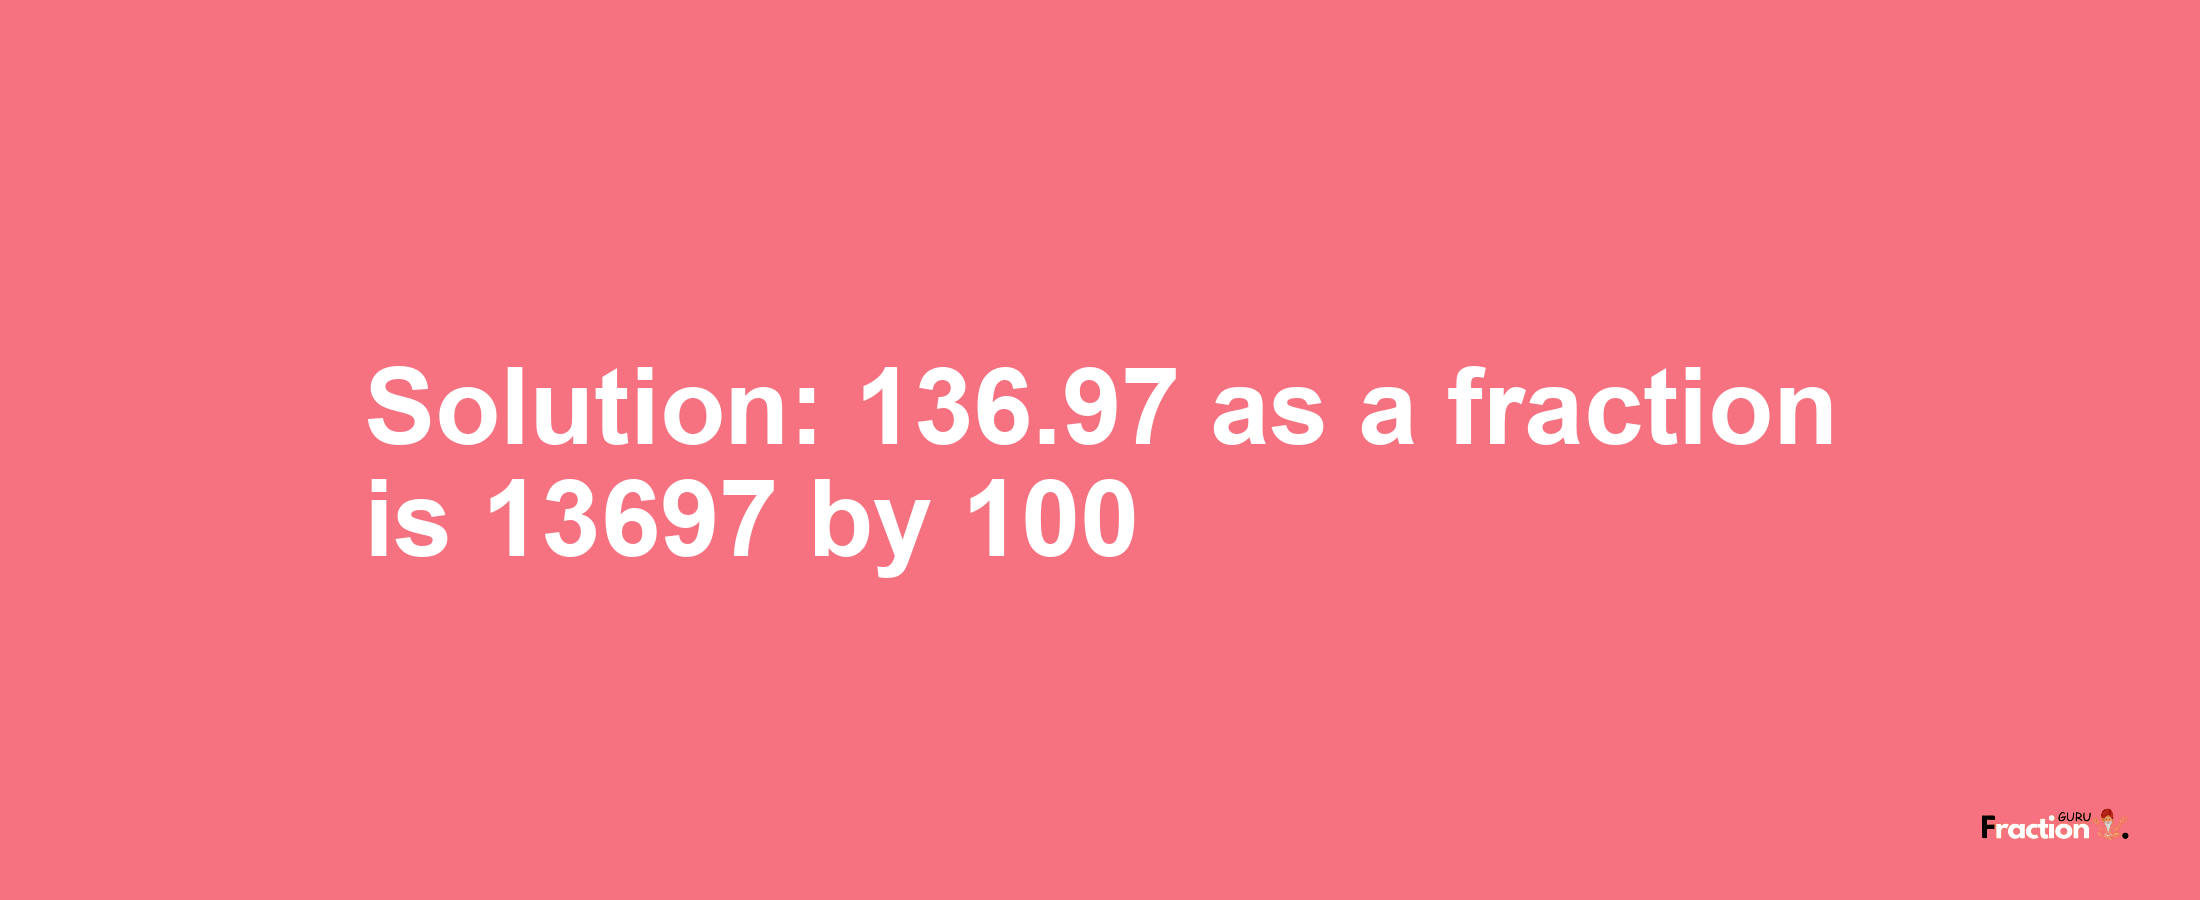 Solution:136.97 as a fraction is 13697/100